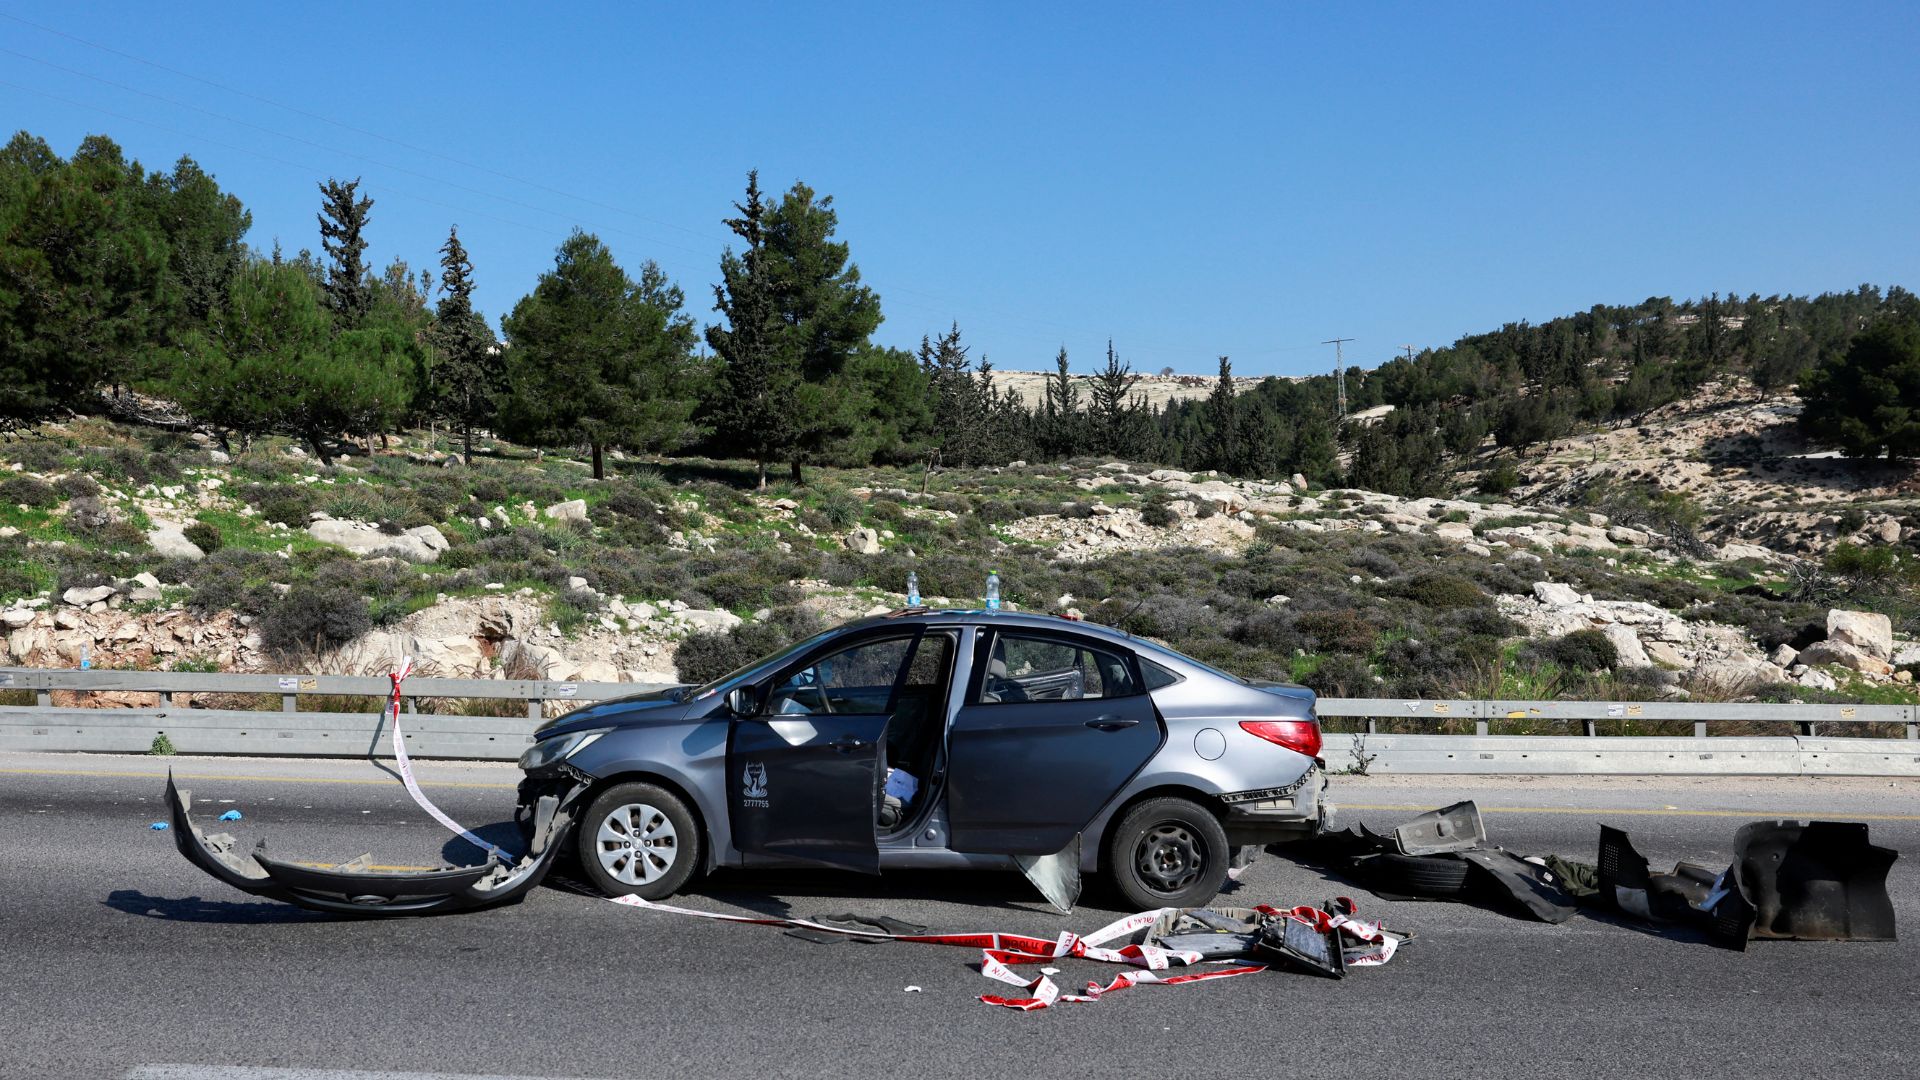 A damaged car is seen at the scene of a shooting attack by Palestinian gunmen near the Maale Adumim settlement, in the Israeli-occupied West Bank. /Ammar Awad/Reuters